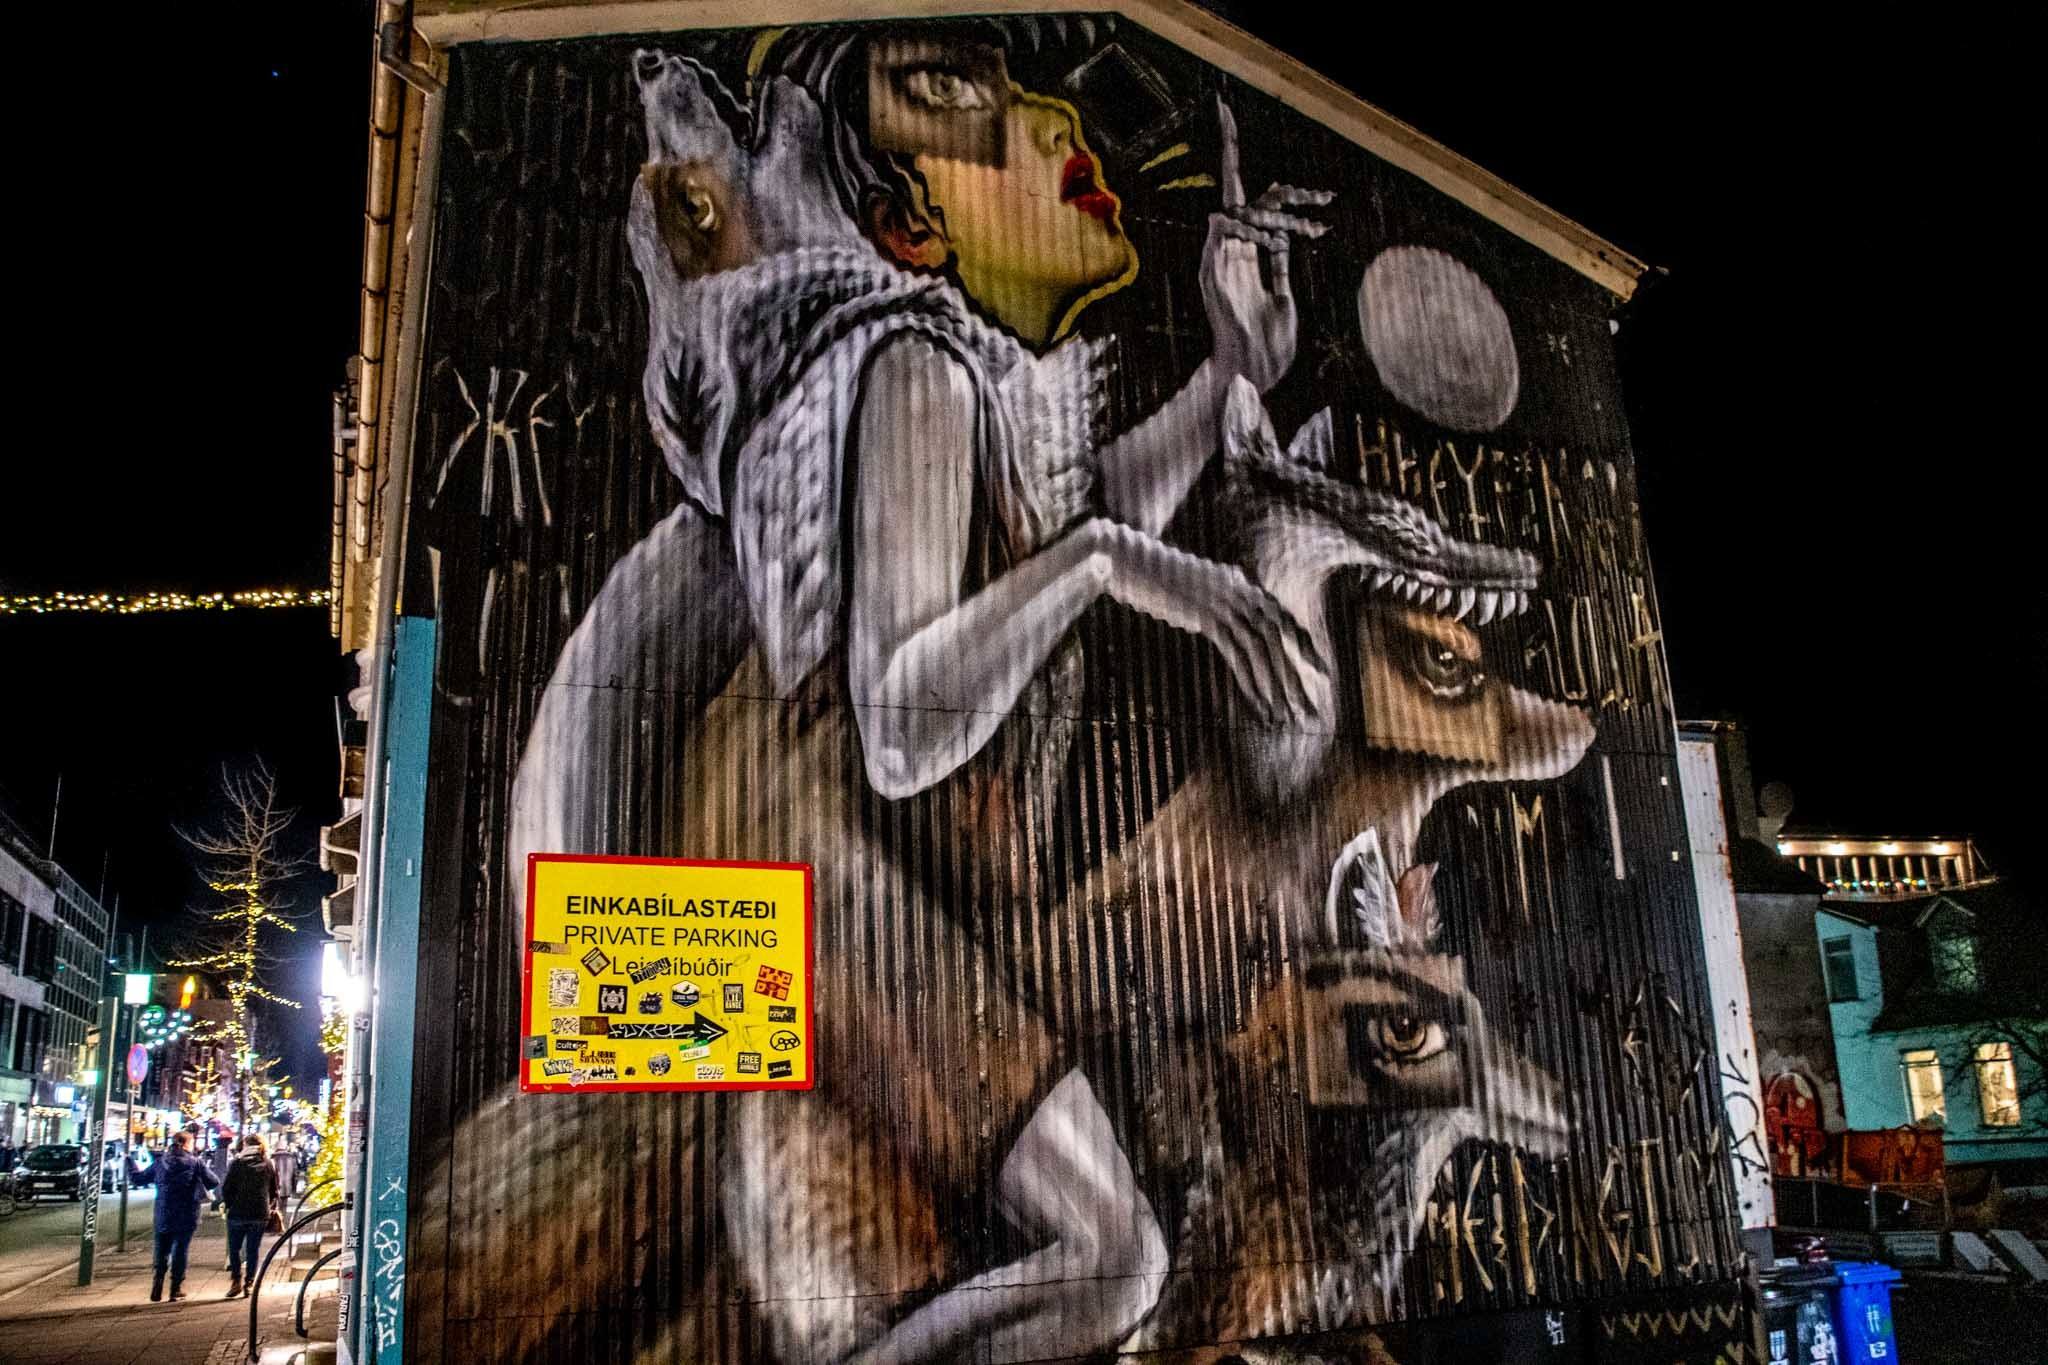 Street art mural of woman and wolves in Reykjavik